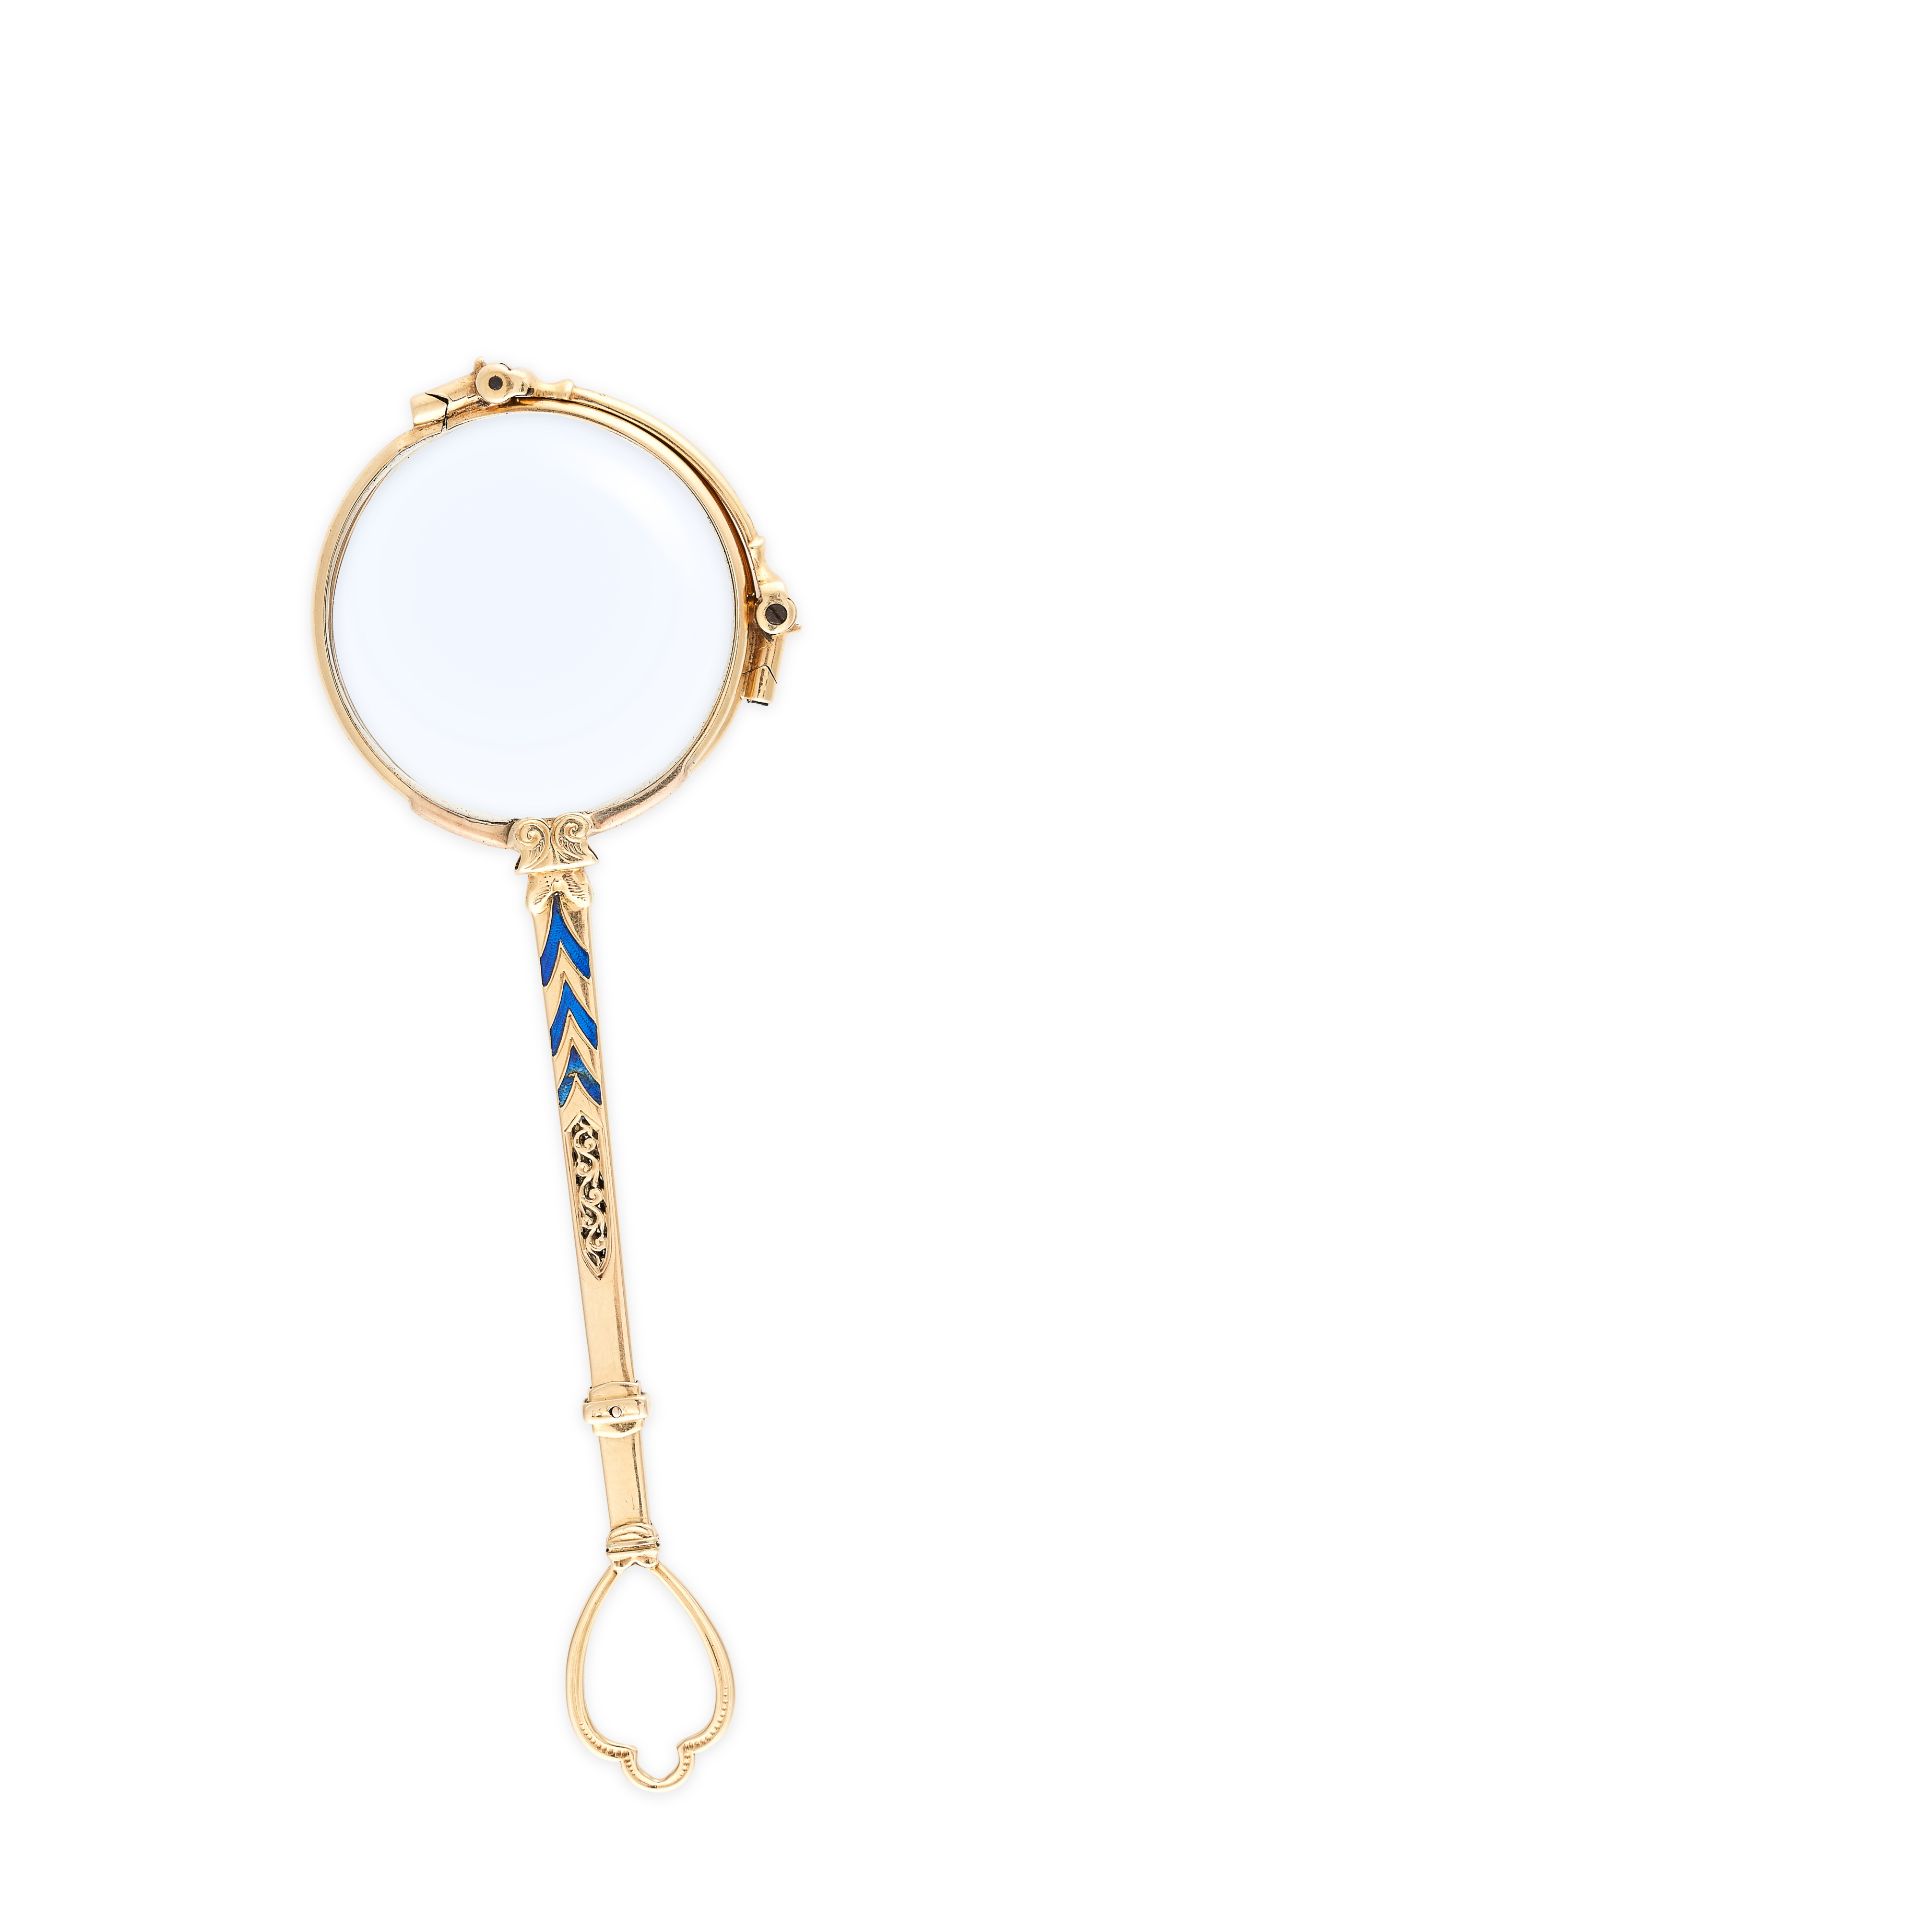 AN ENAMEL LORGNETTE, EARLY 20TH CENTURY in 14ct yellow gold, the two circular lenses in a hinged